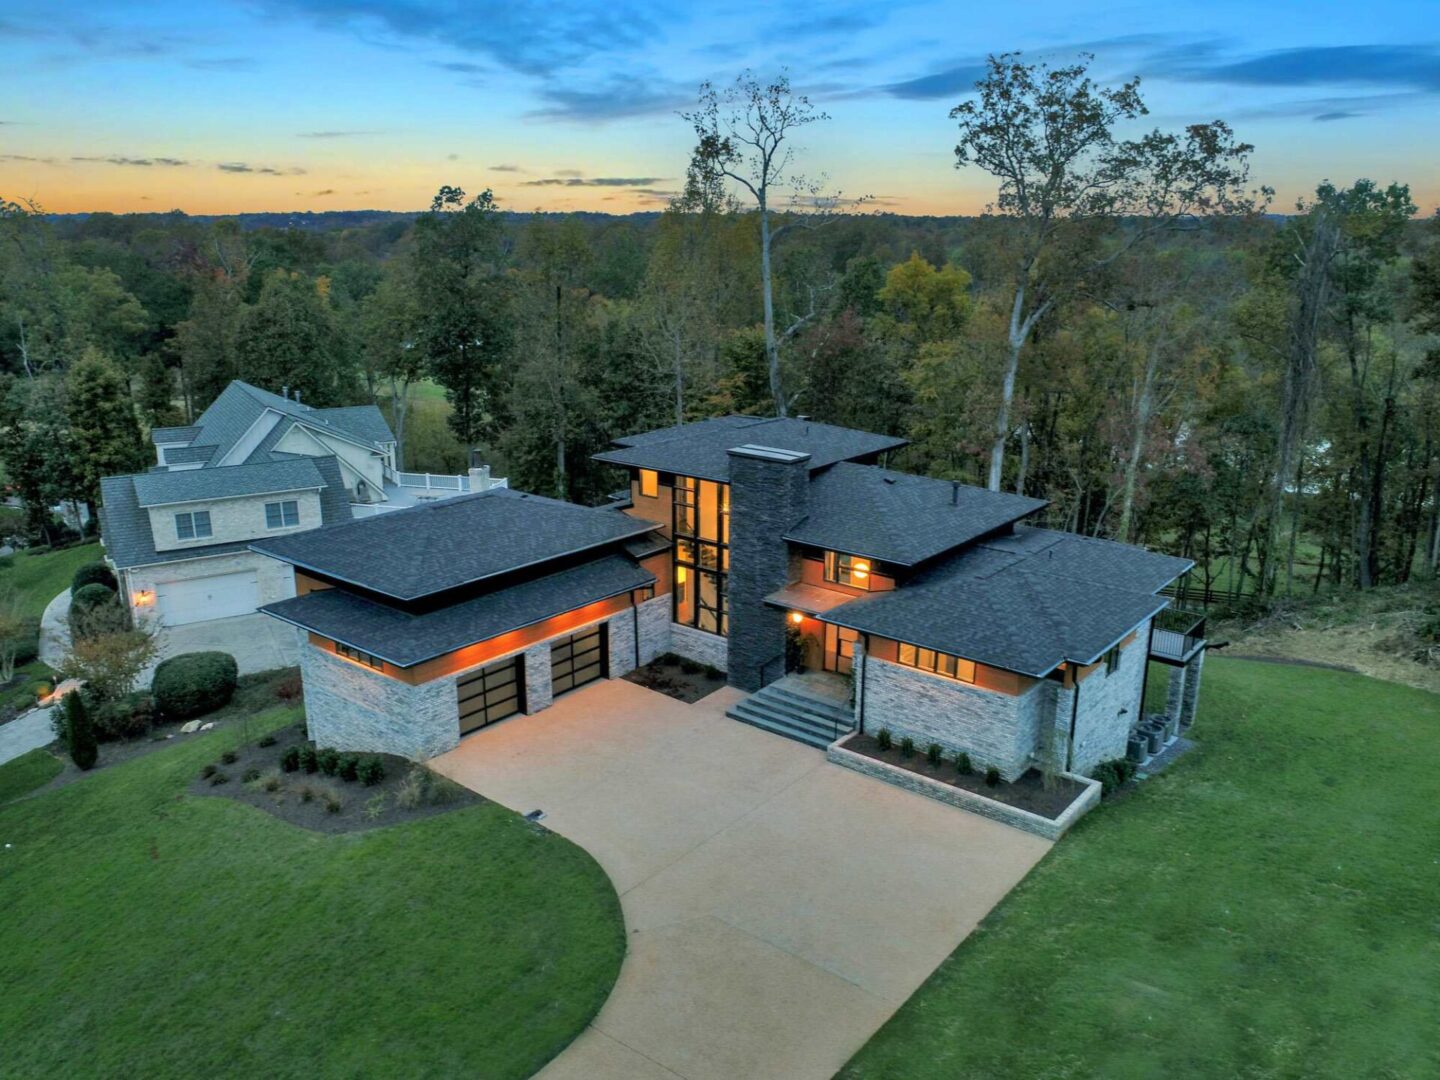 A large modern home with an aerial view of the house.